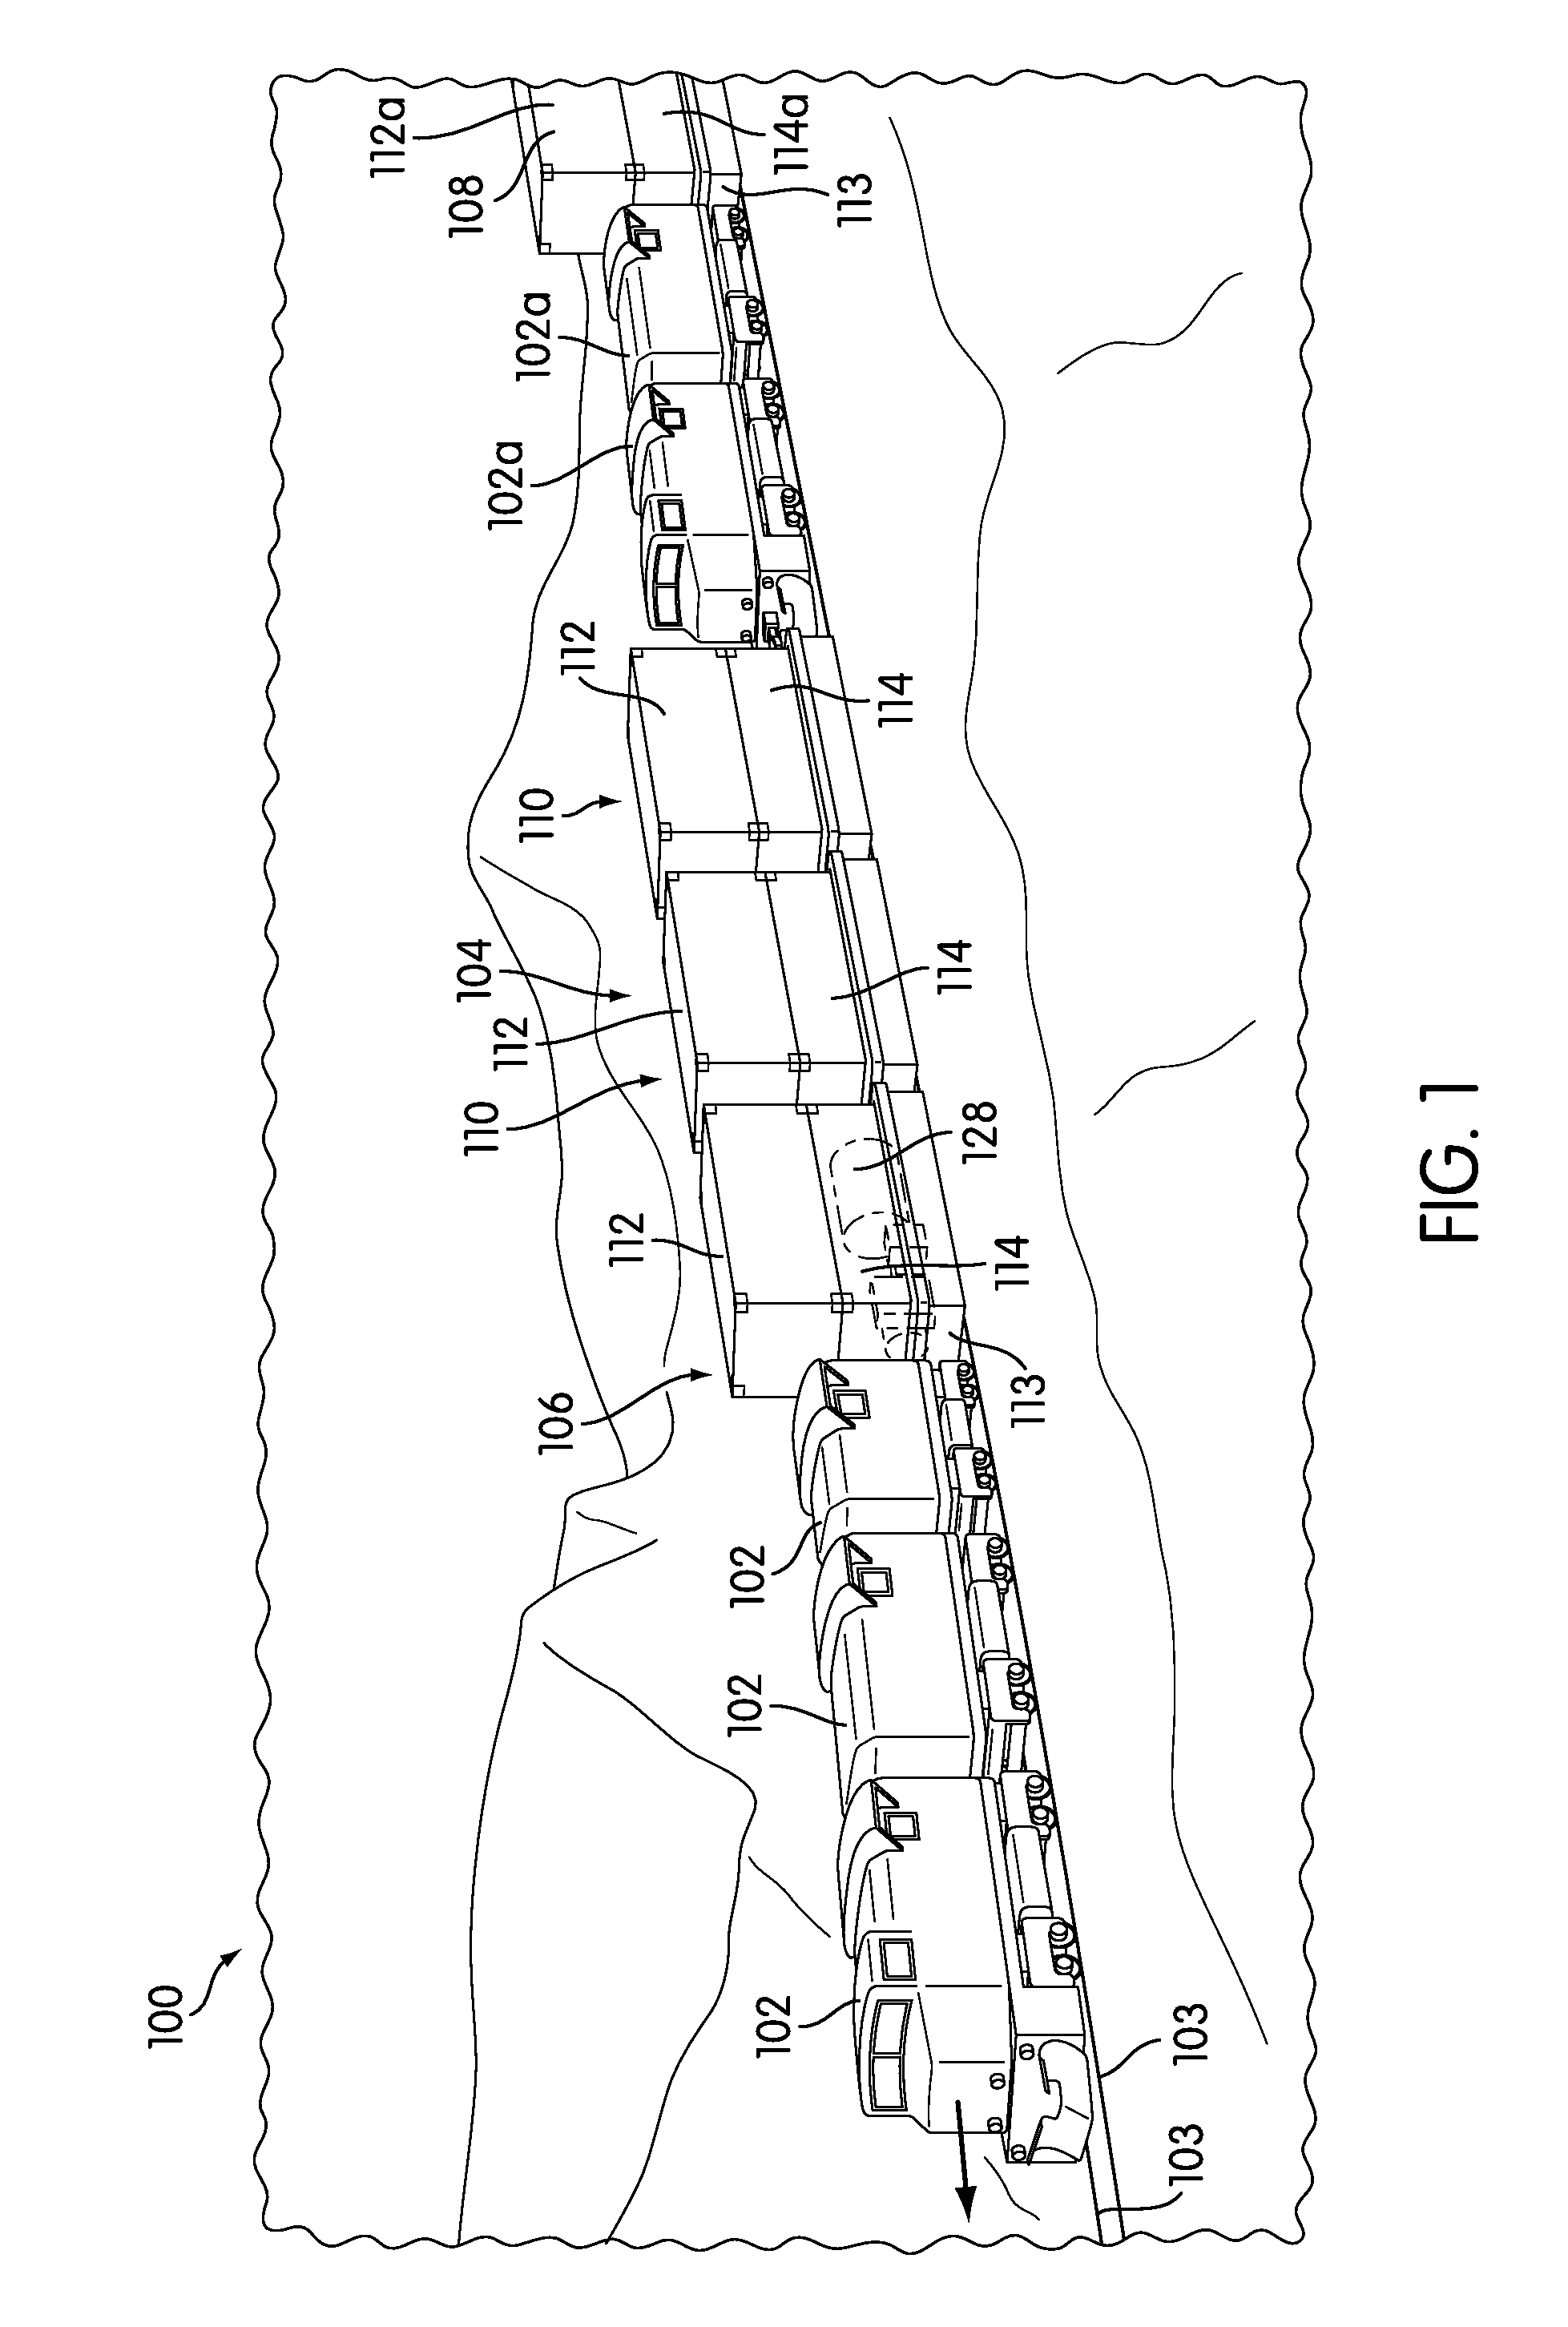 Rail lubrication and/or friction modification system within a non-freight carrying intermodal container